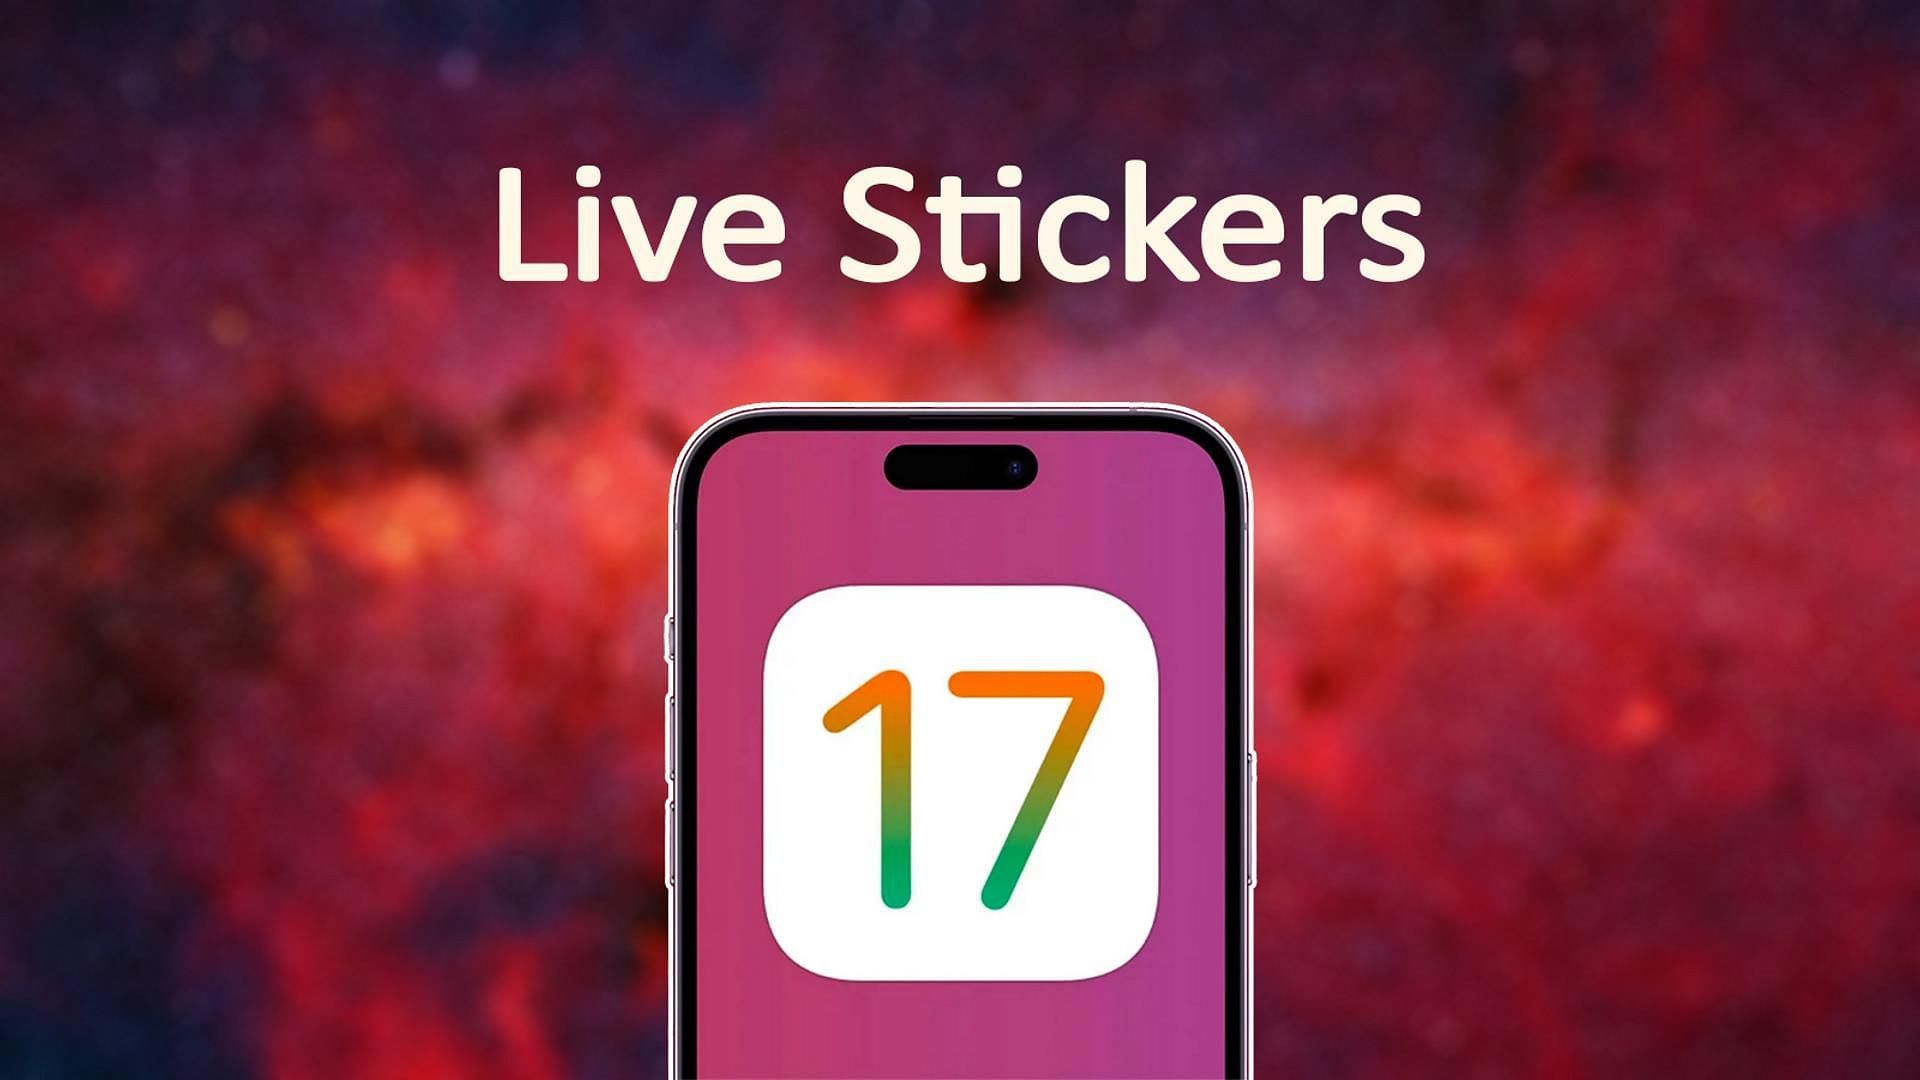 A guide on how to create and send Live Stickers on iOS 17 (Image via Sportskeeda)